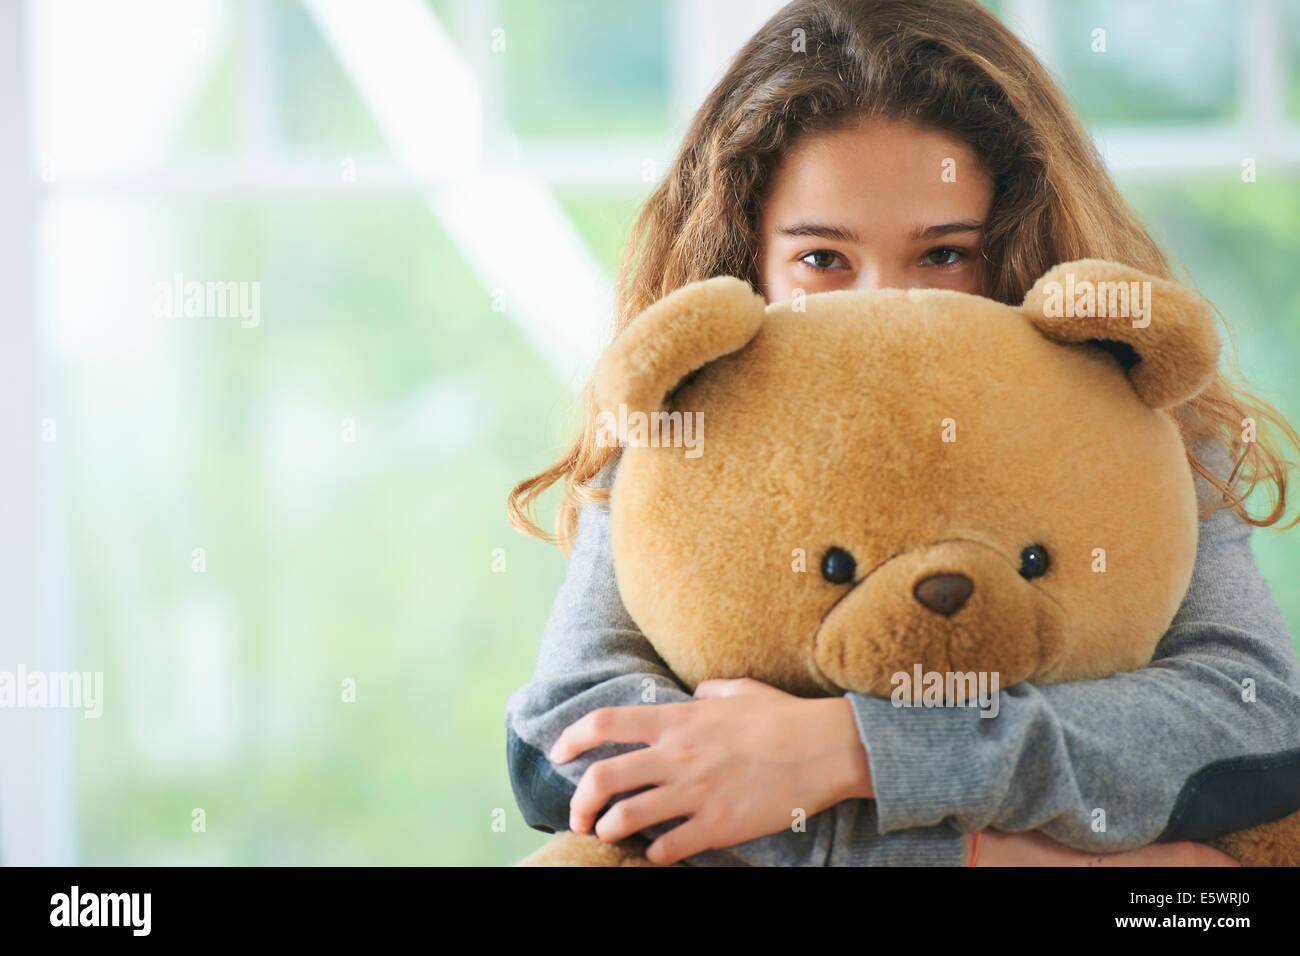 Portrait of young girl hugging teddy bear Stock Photo